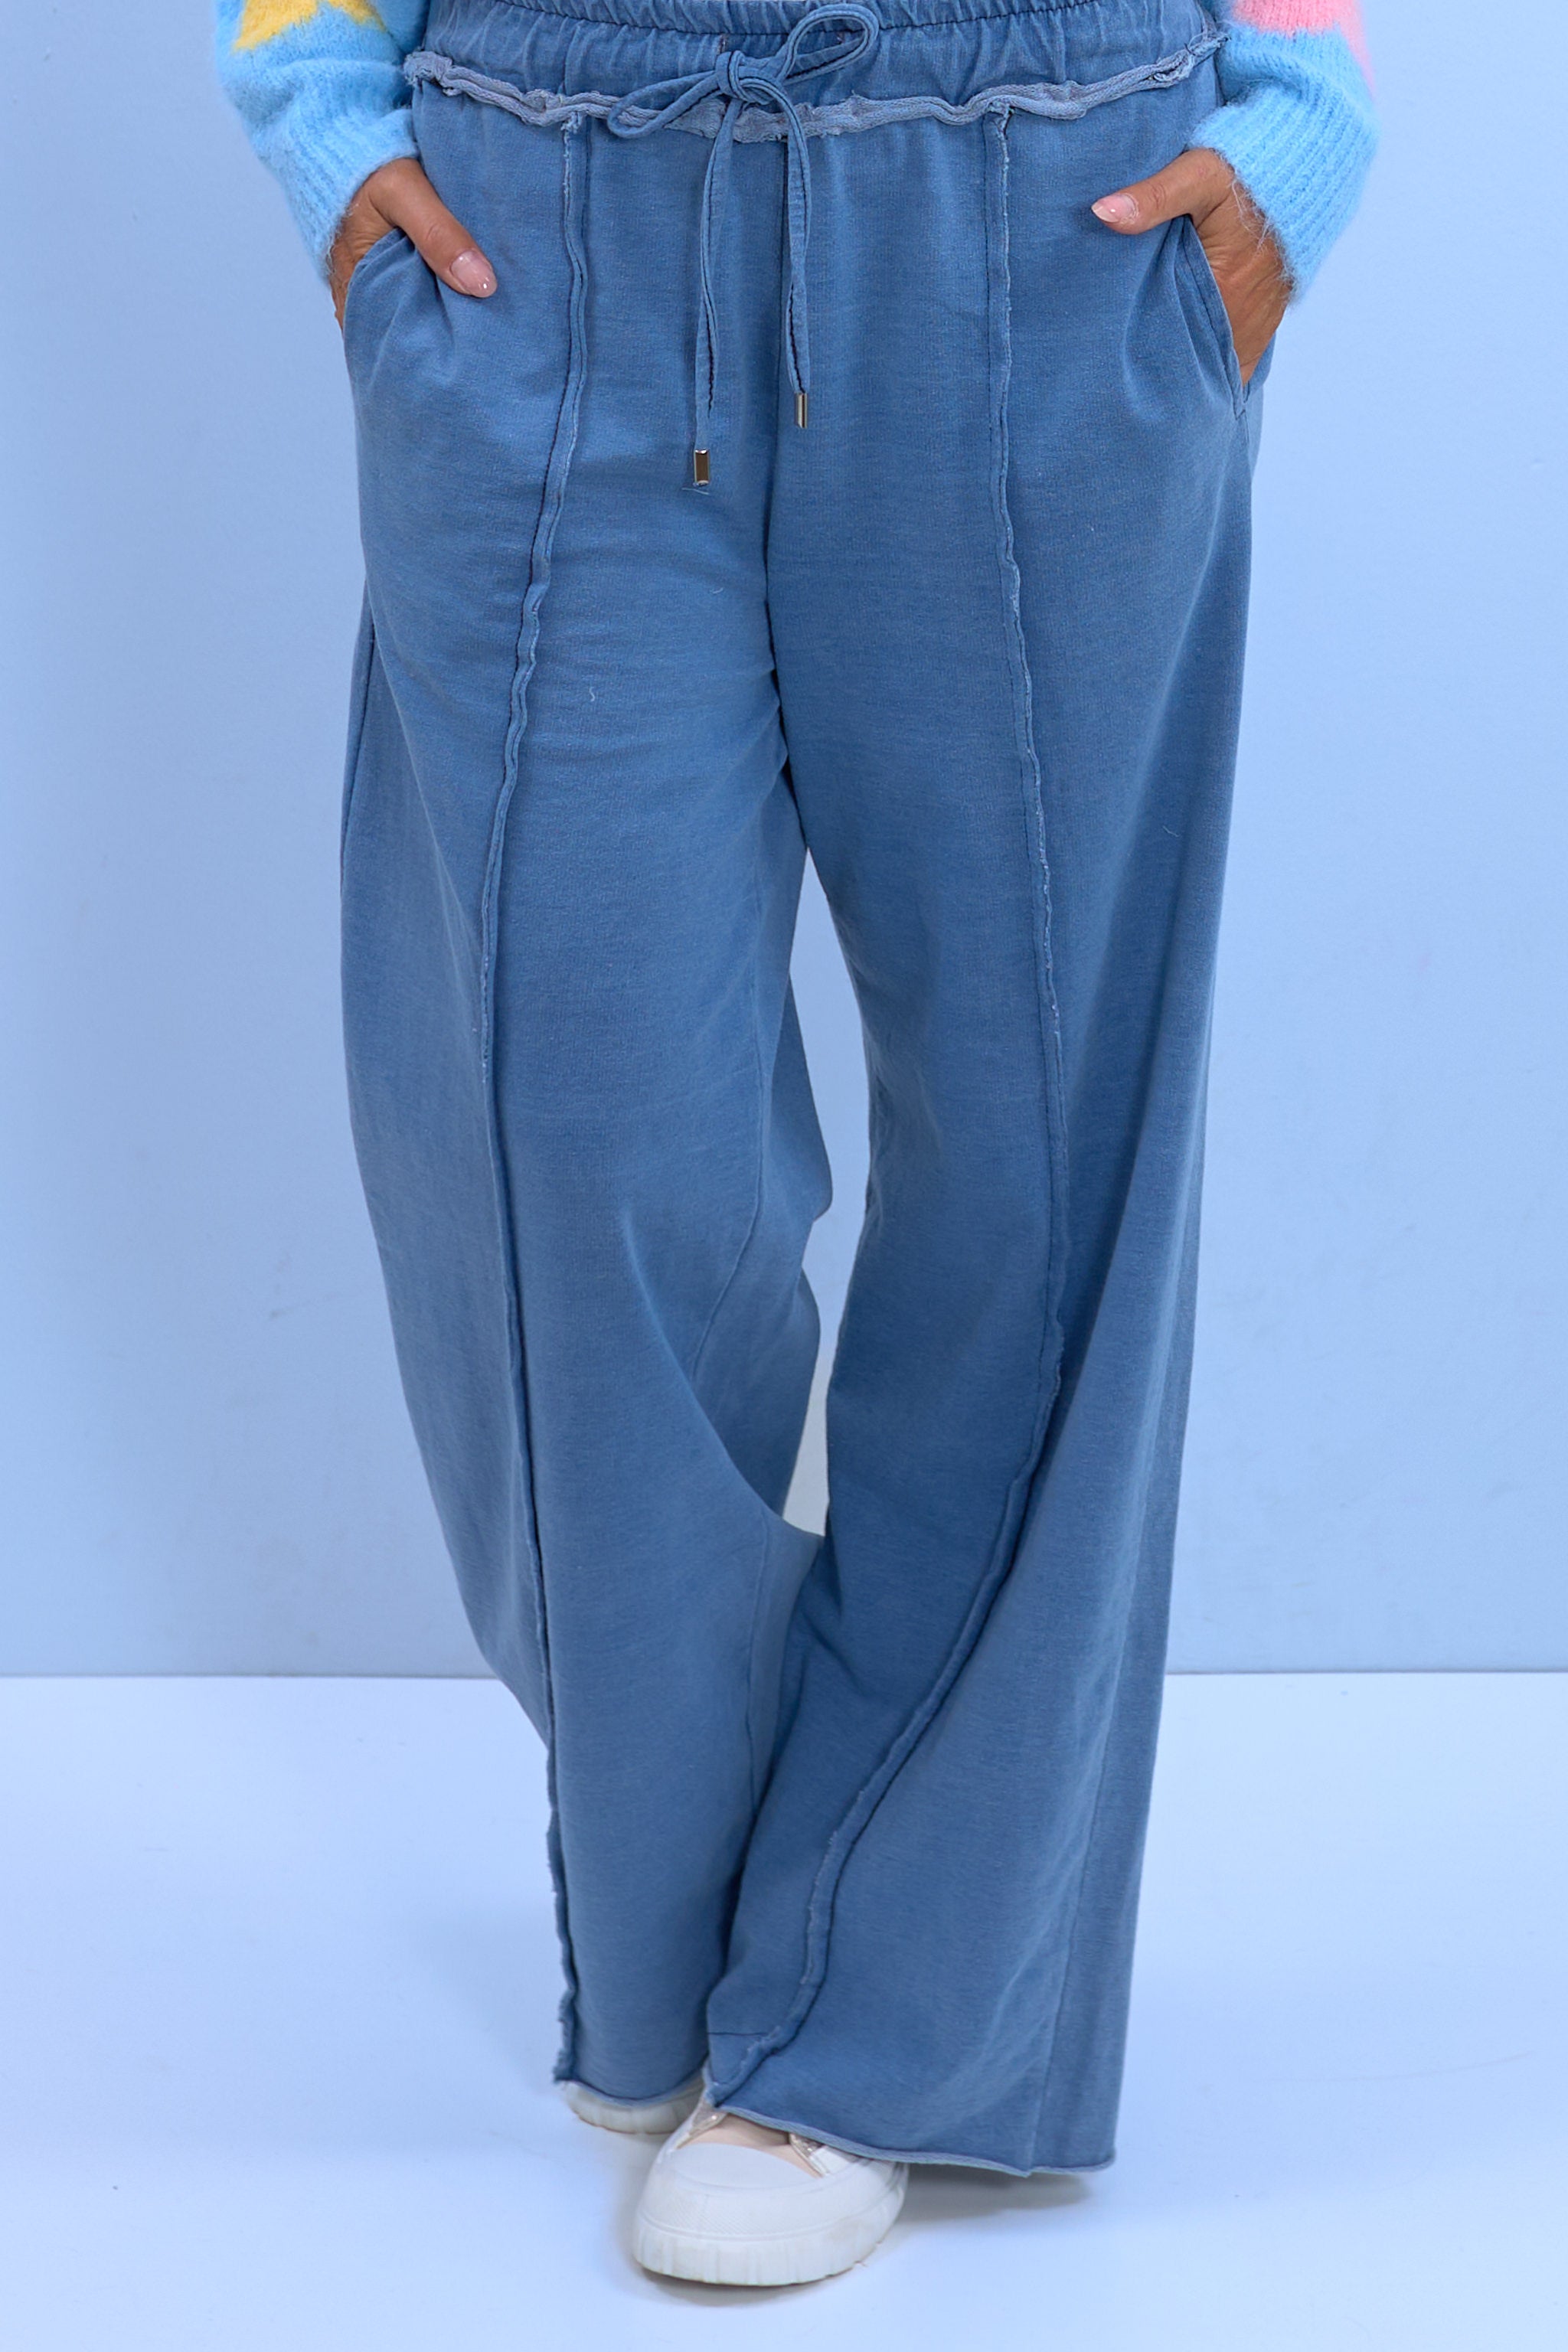 Marlene style sweatpants with piping, light blue